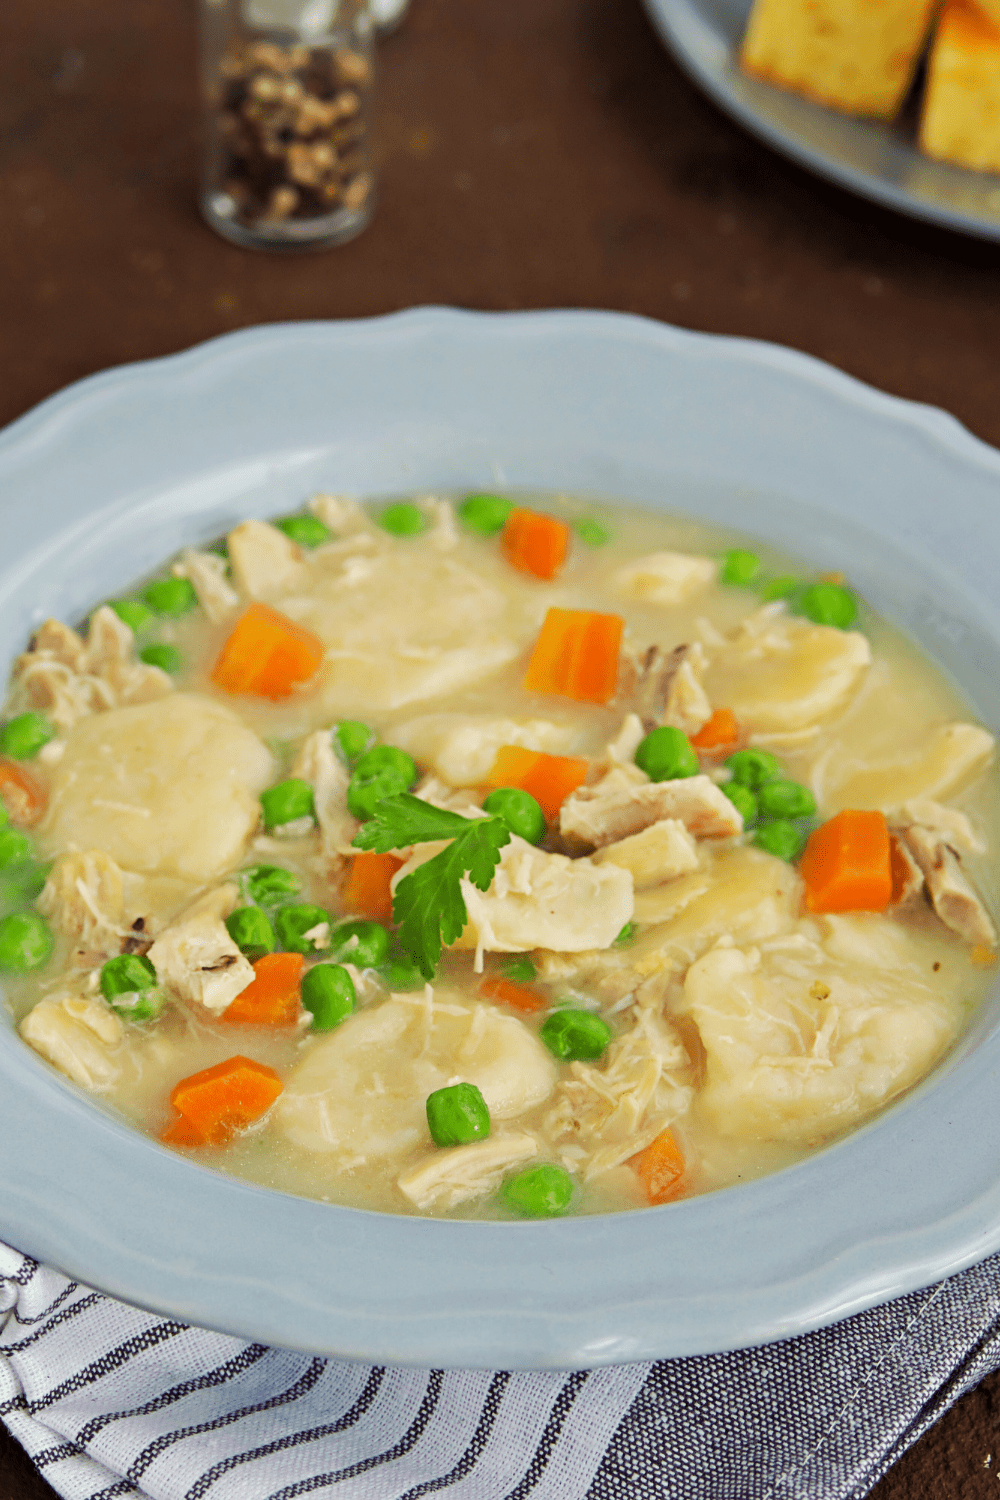 Bowl of soup with chicken, dumplings, carrots and chopped onion leaves.